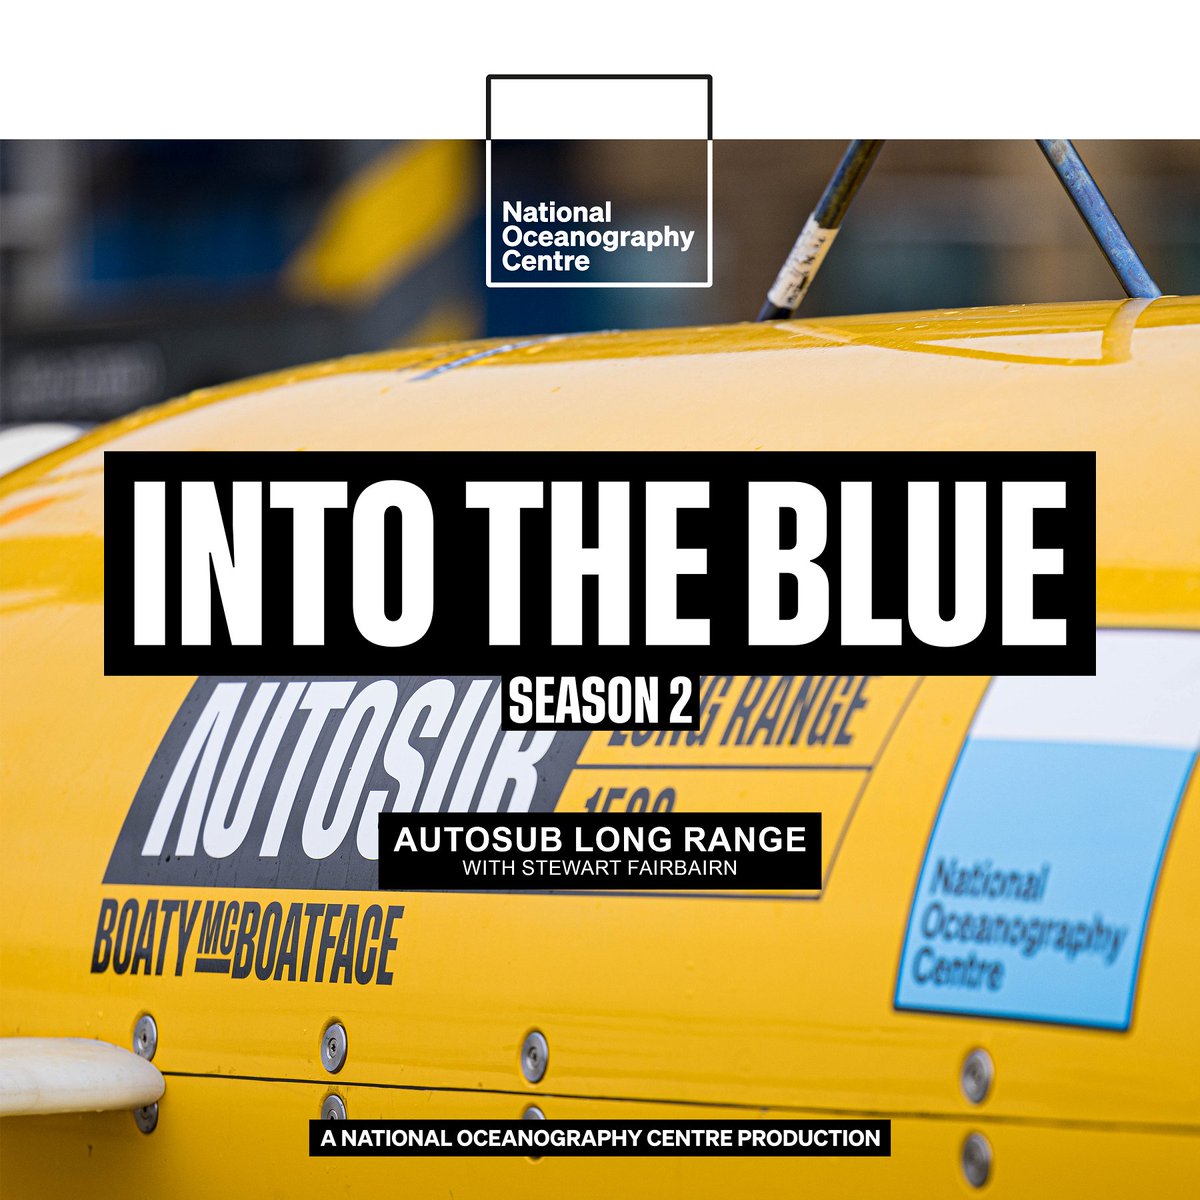 This week on #NOCIntoTheBlue... 🤖

Operations Engineer Stewart Fairbairn joins the podcast to cover some recent successes and the exciting future of #BoatyMcBoatface!

Live from 12pm on Wednesday on YouTube and all podcast platforms 👀 youtu.be/izdHj4cWWKQ